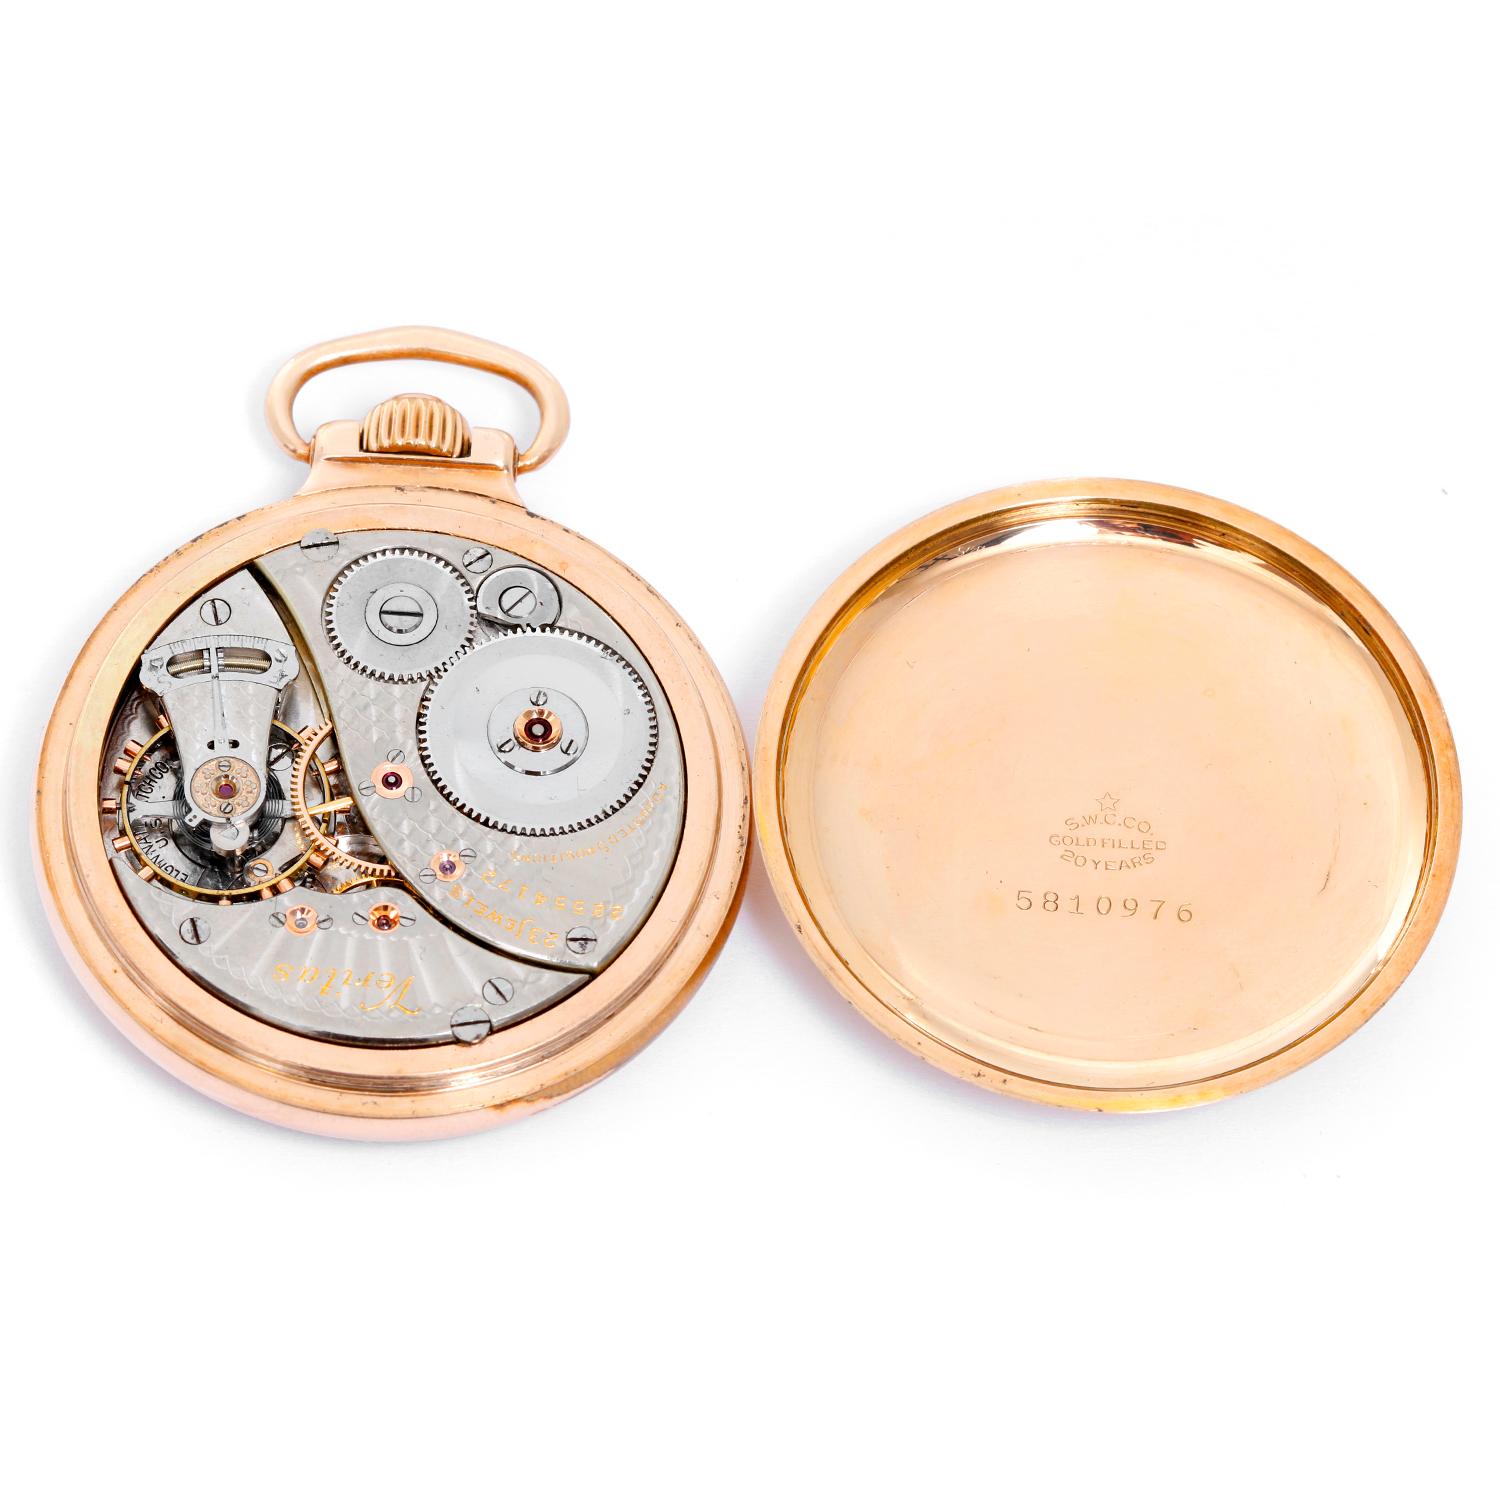 Elgin  Veritas Rail Road Pocket Watch - Manual winding; 23 Jewels . Gold filled with a R. R. case . Double sunk enamel dial with Arabic numerals . Pre-owned with custom box. Railroad approved. 